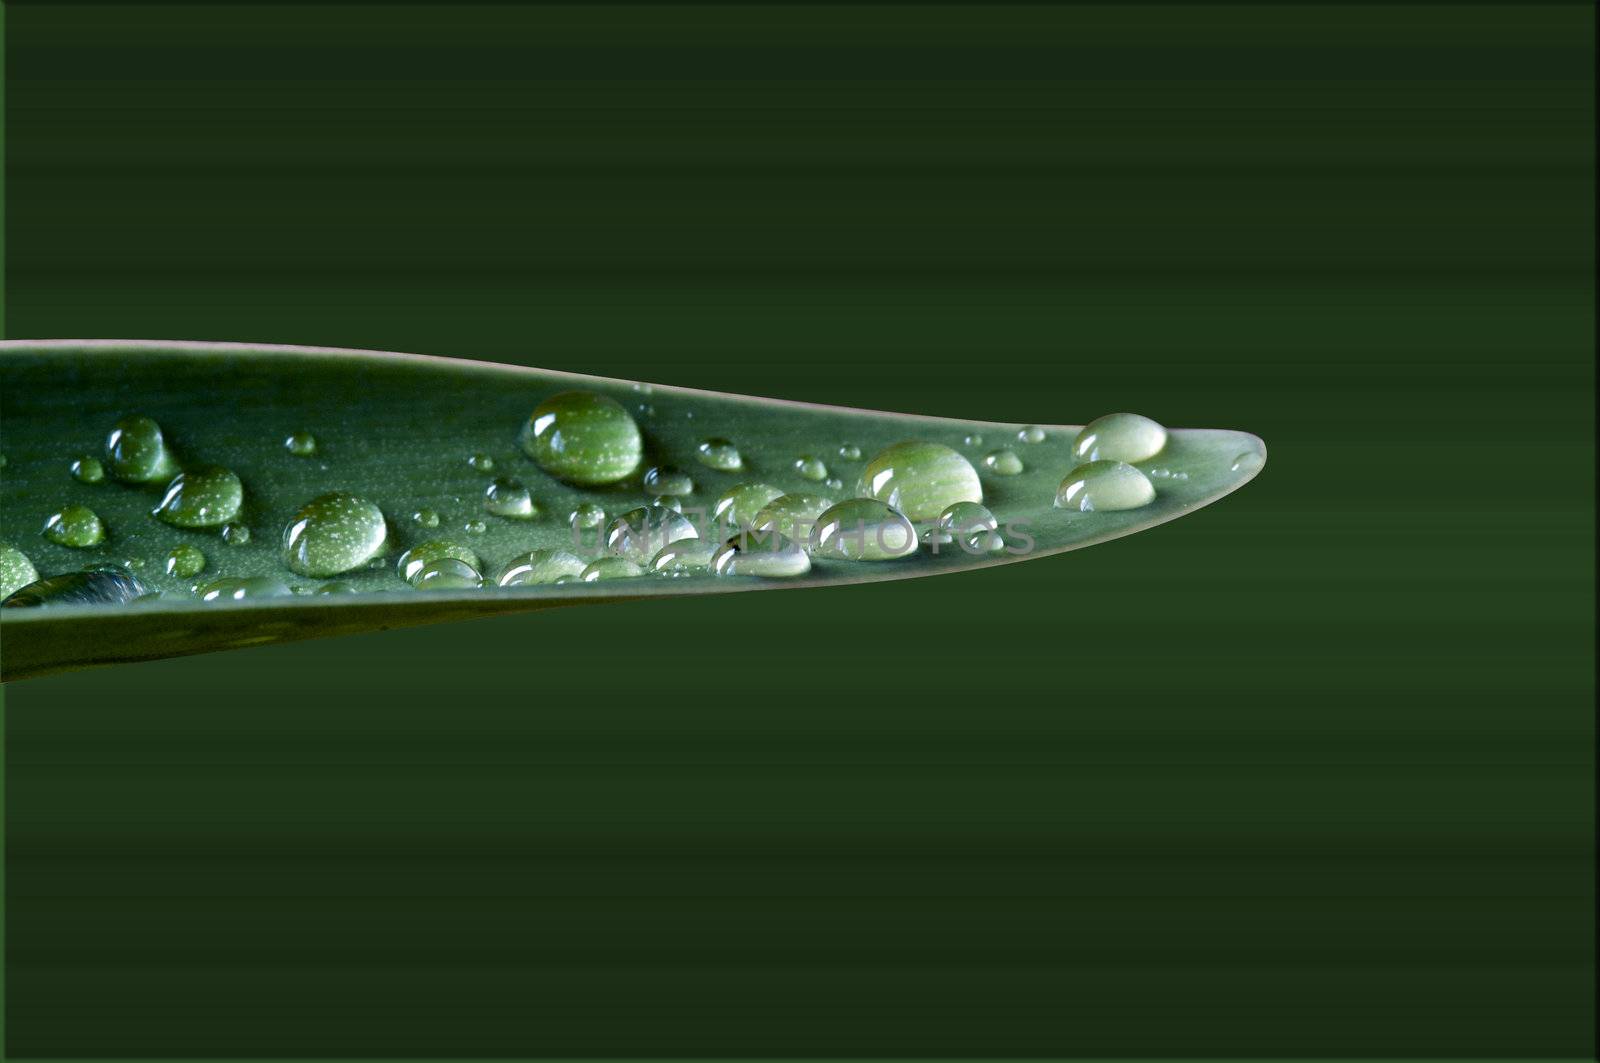 water drops on green leave